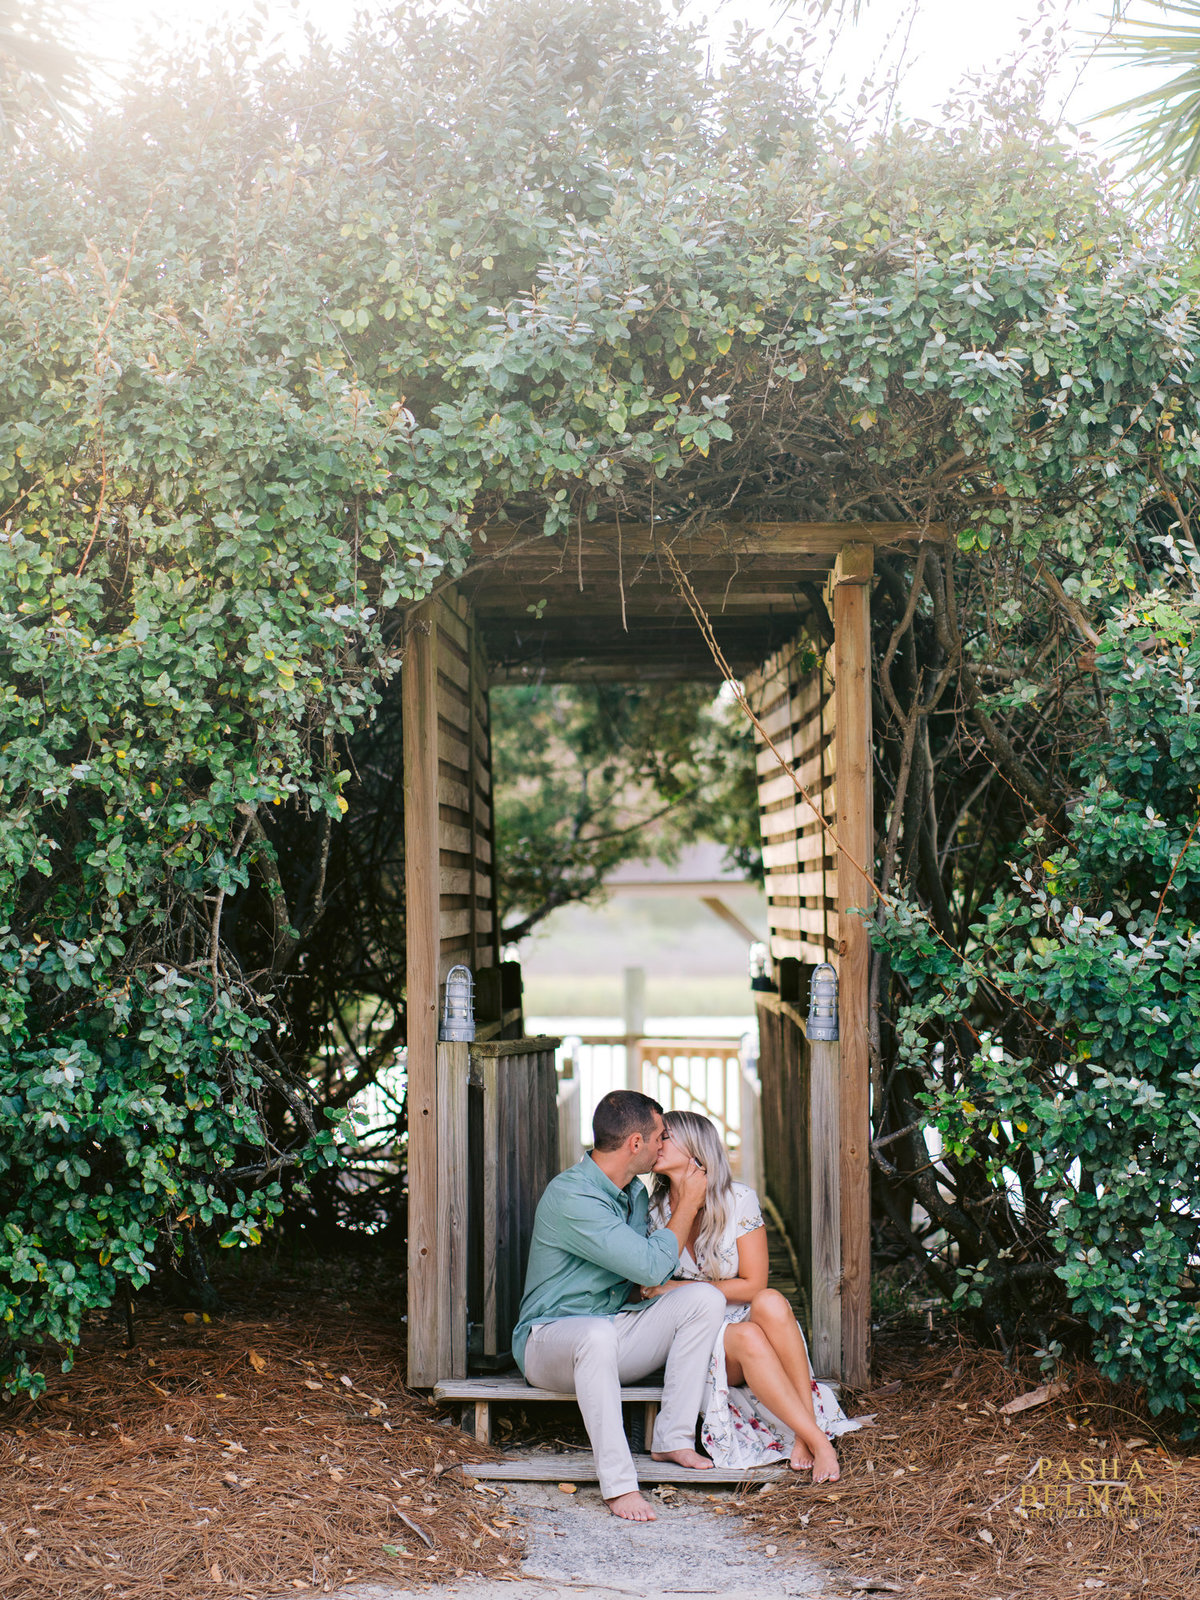 Pawleys Island Engagement Photographer - Engagement Pictures in Pawleys Island SC